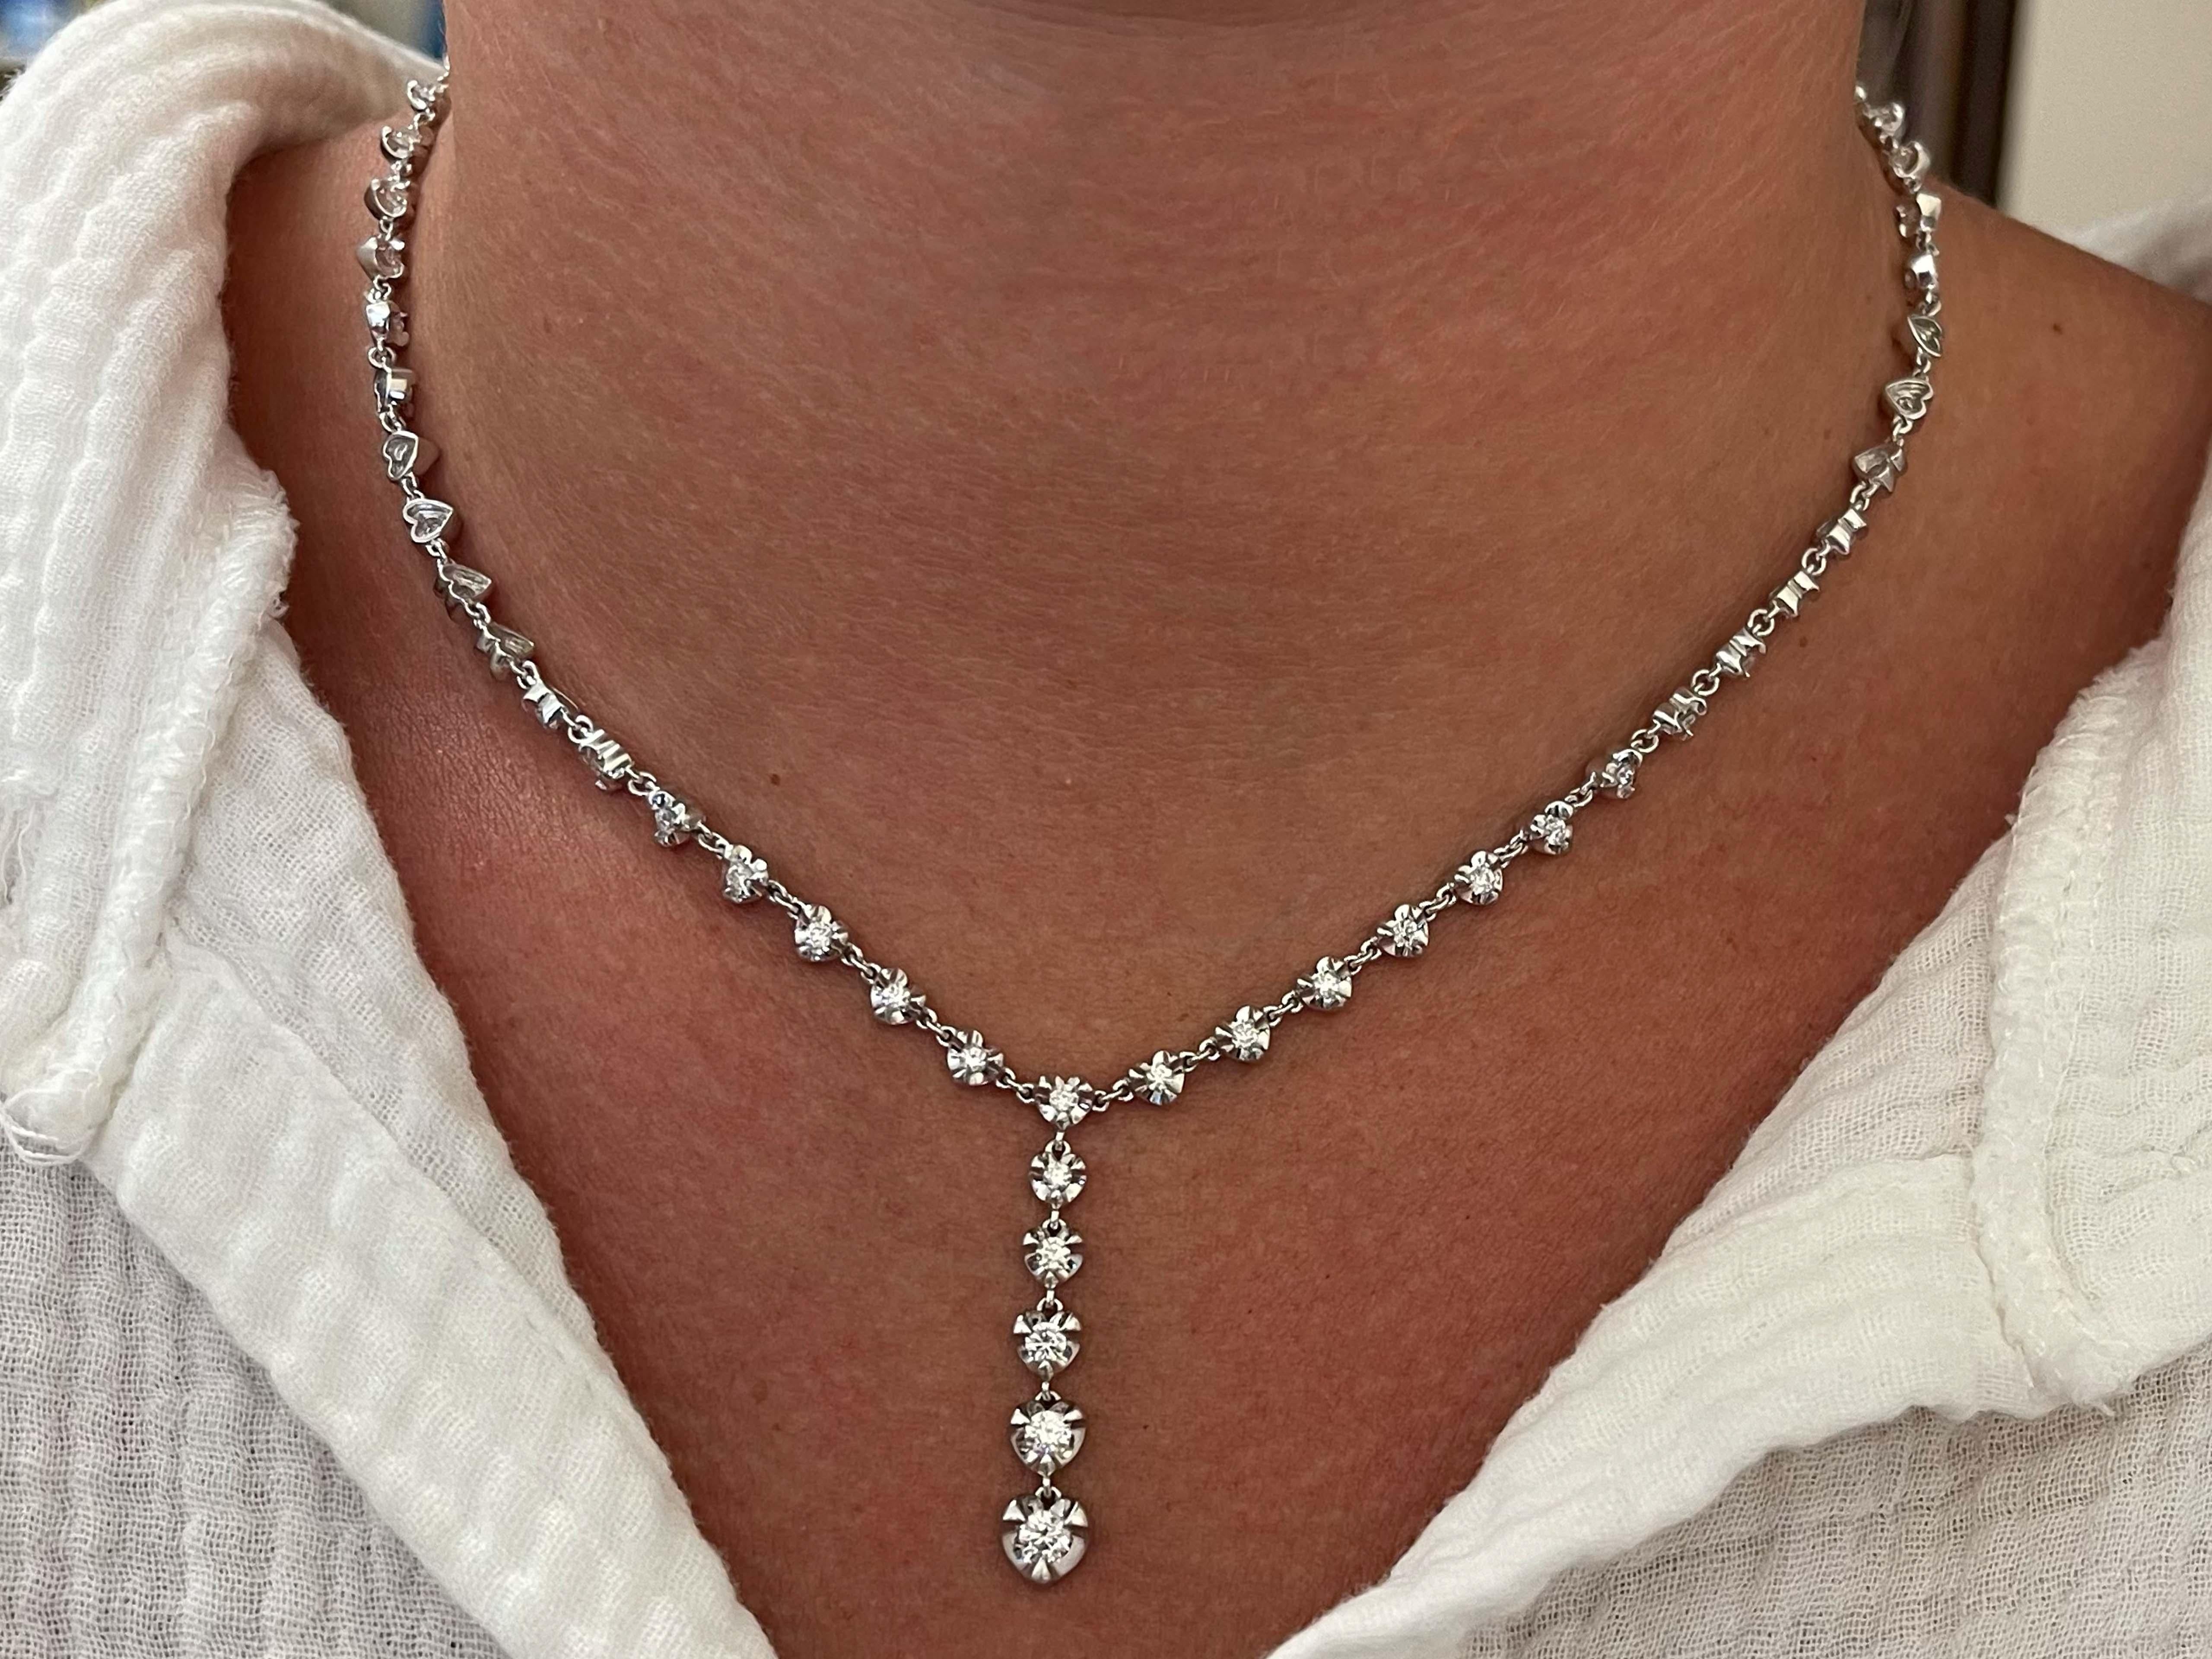 Item Specifications:

Style: Diamond Heart Drop Necklace

Necklace Metal: 14k White Gold

Total Weight: 19.2 Grams

Chain Length: 17